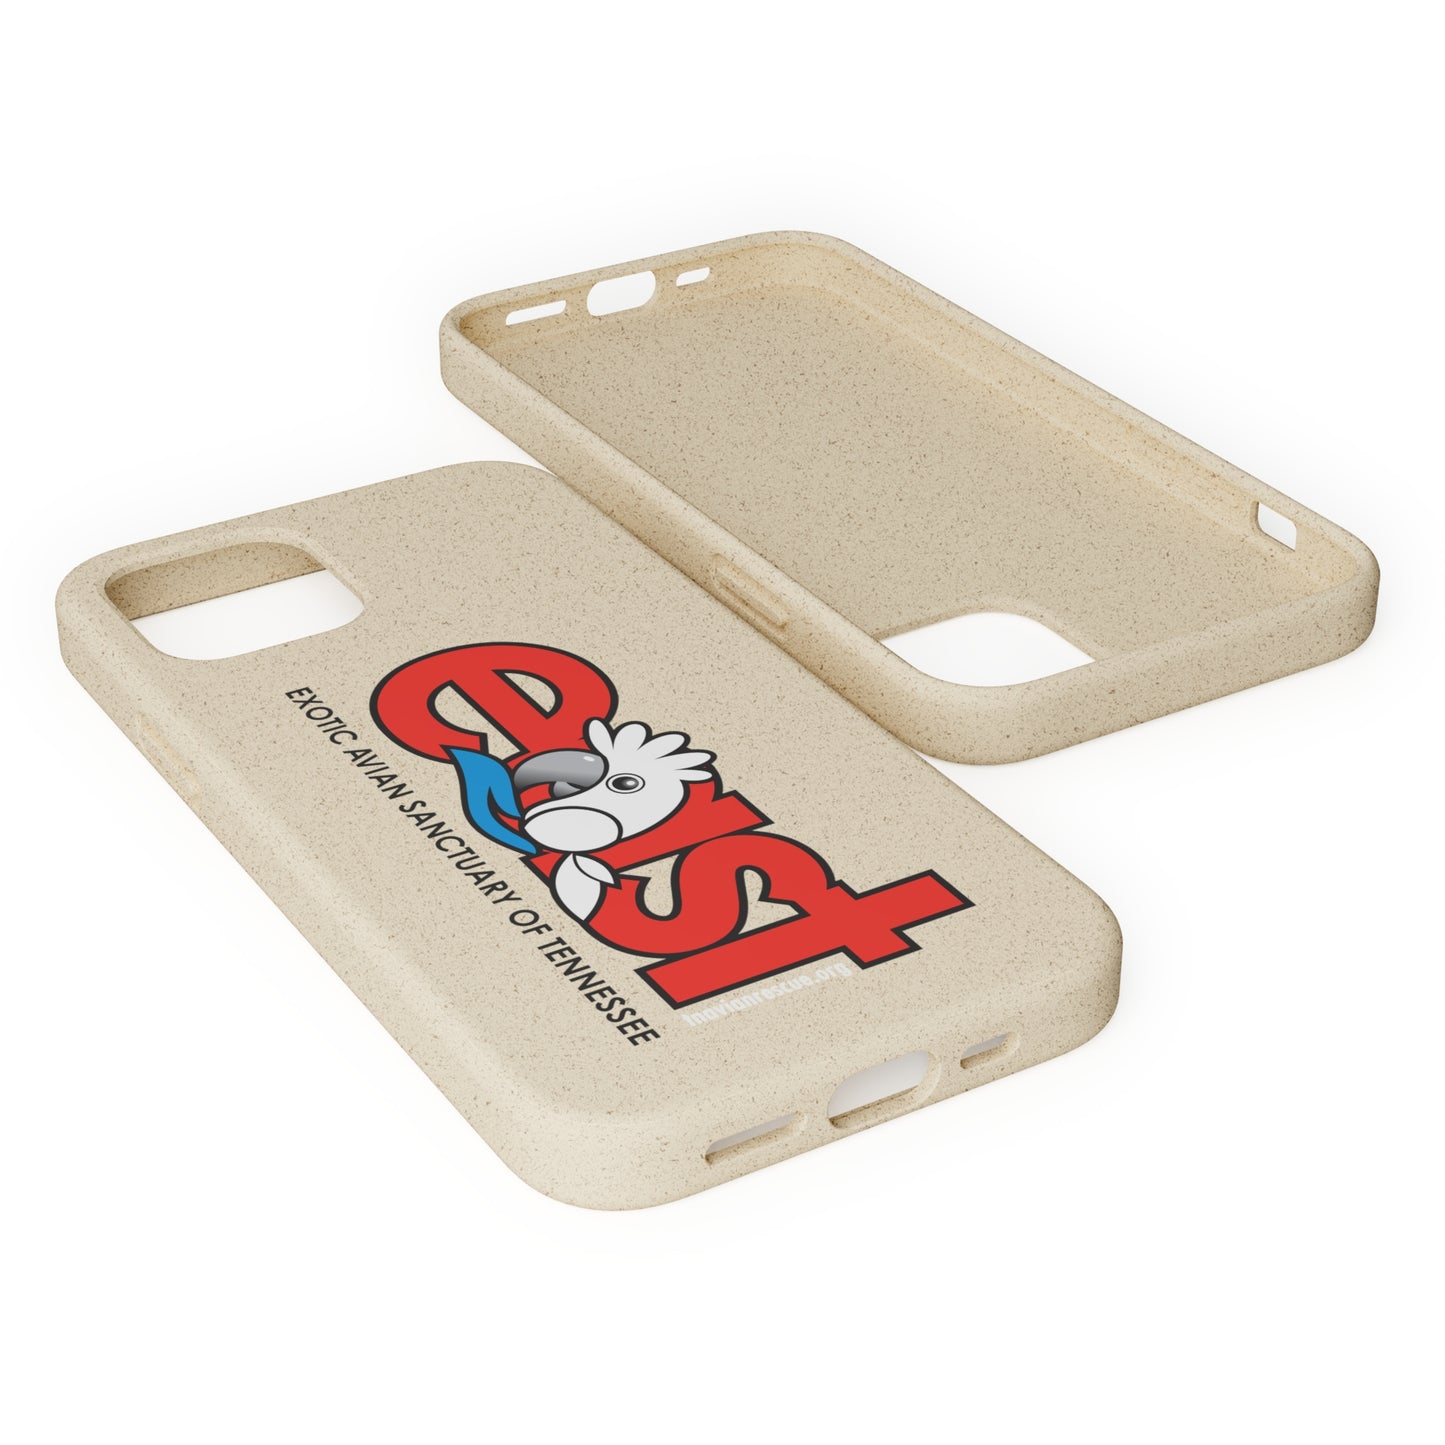 EAST Biodegradable Phone Cases